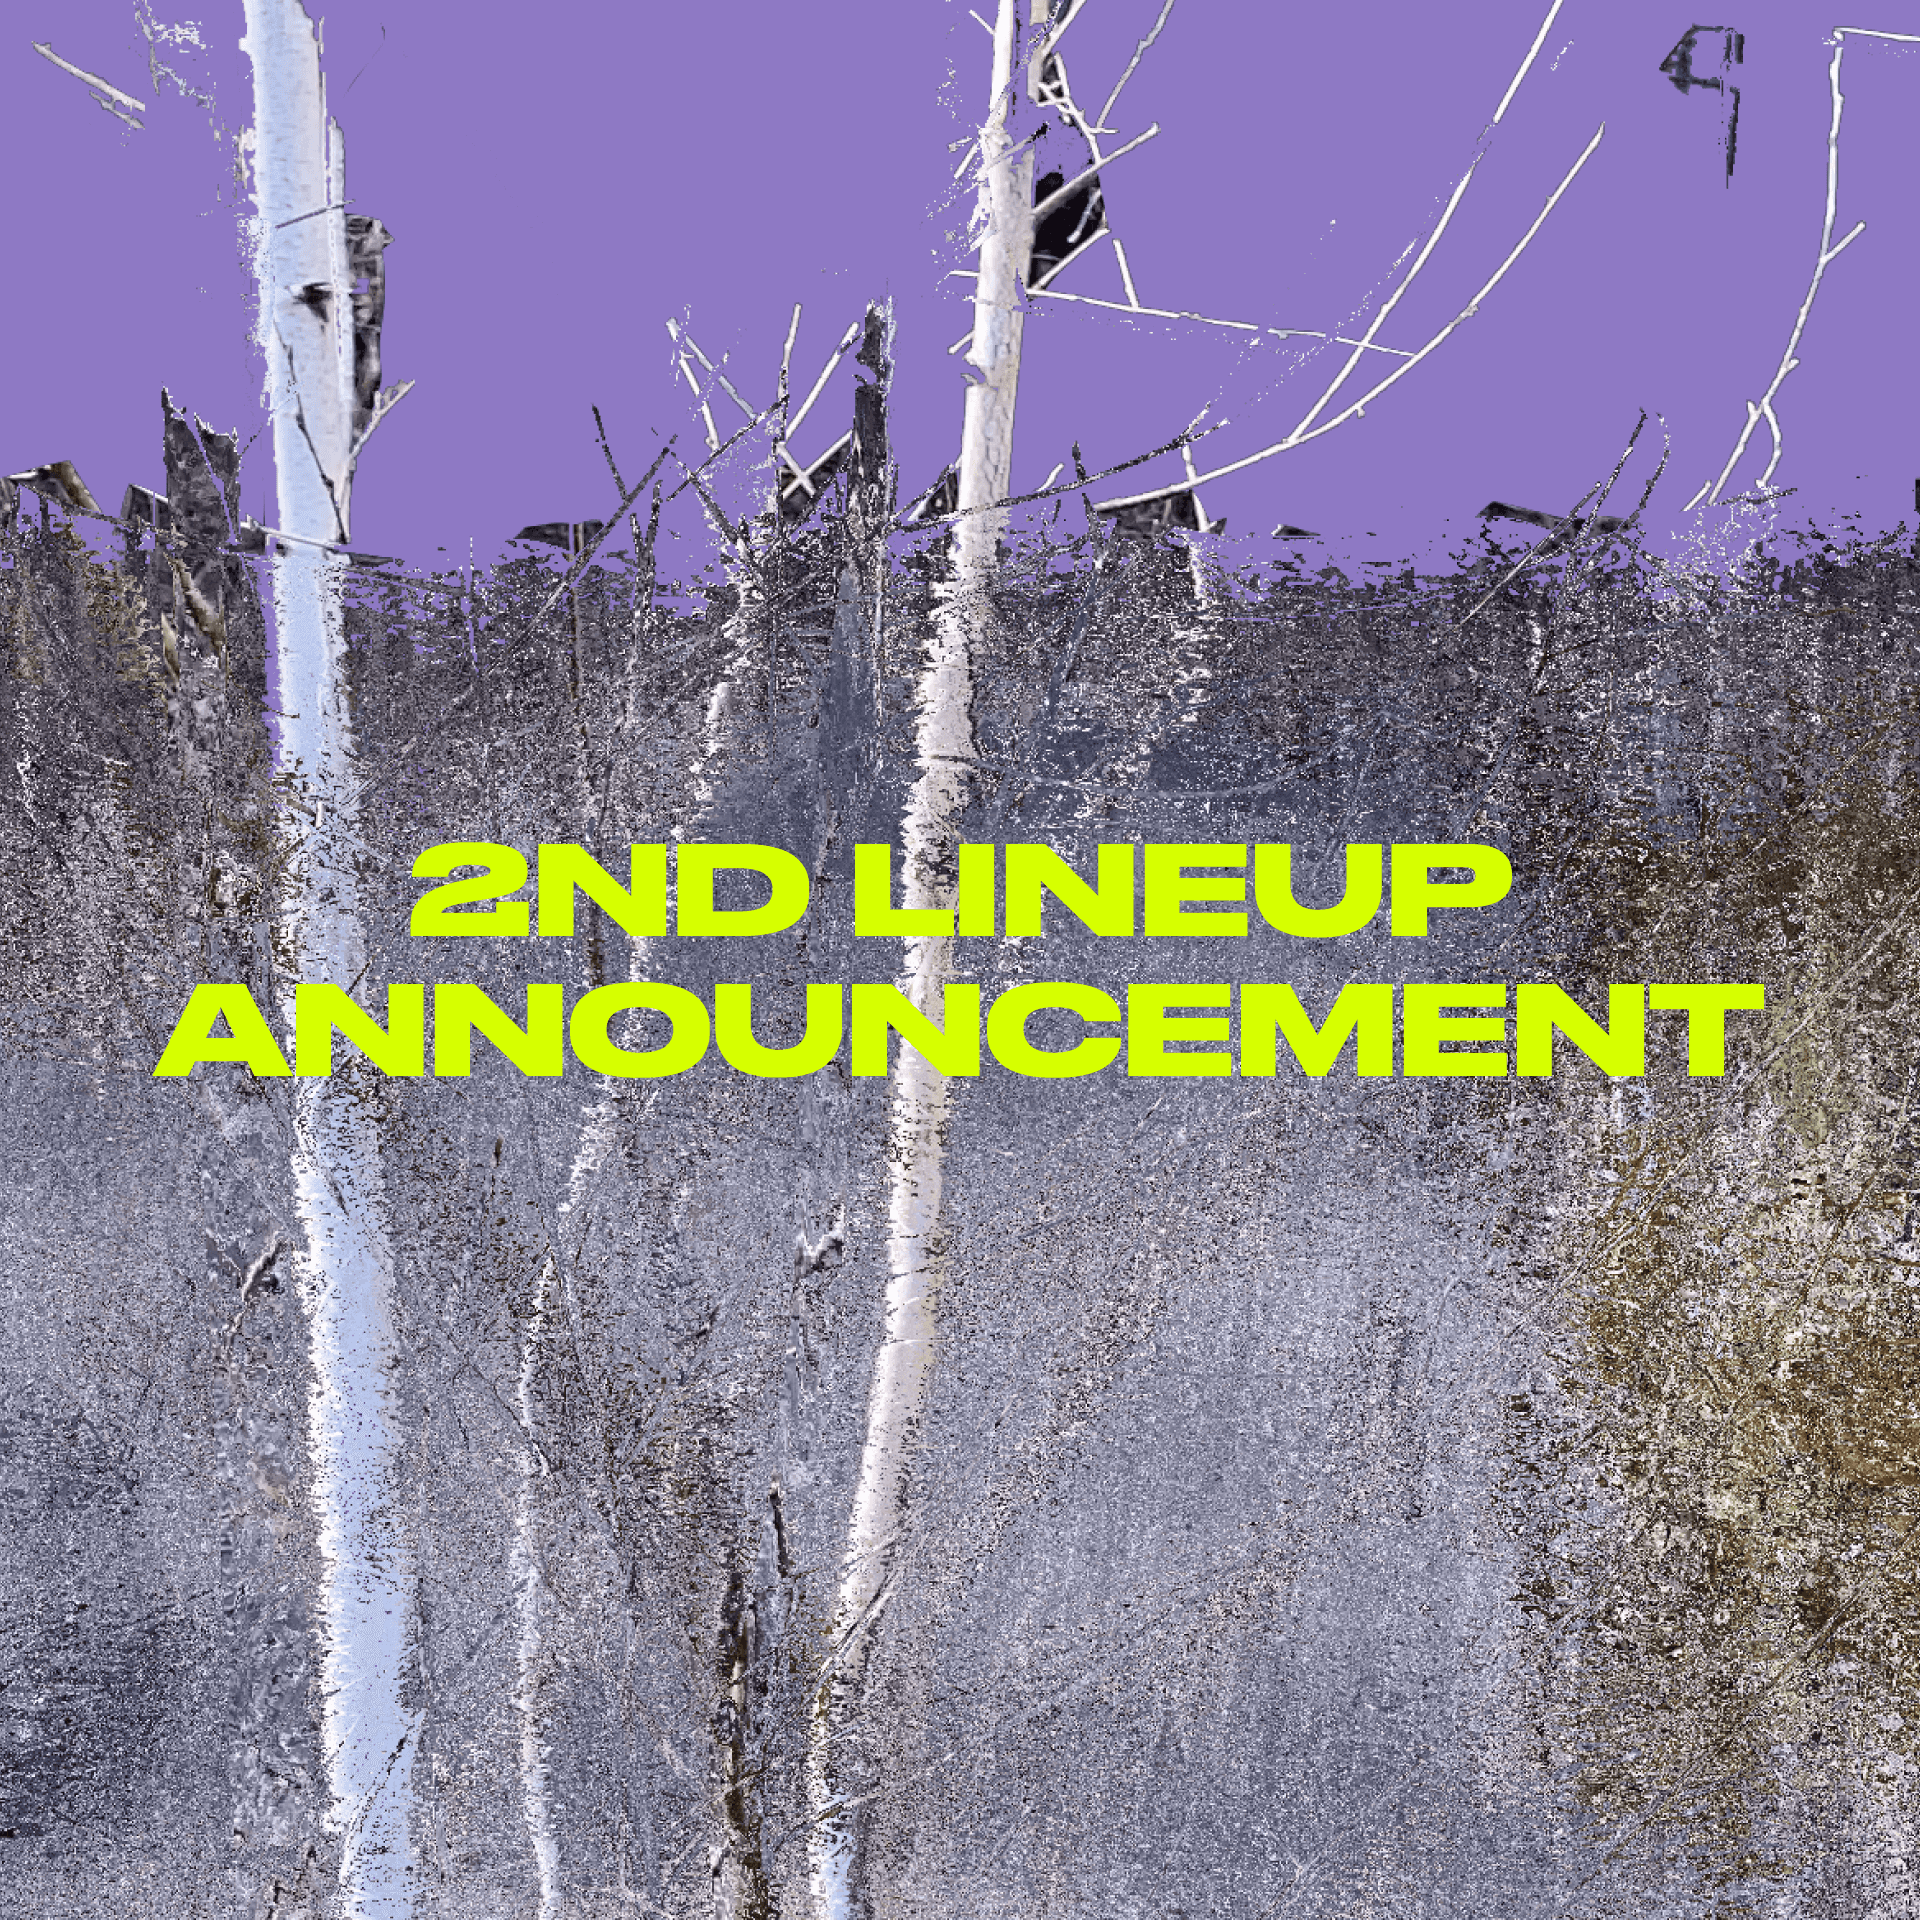 Second artists announcement is here!